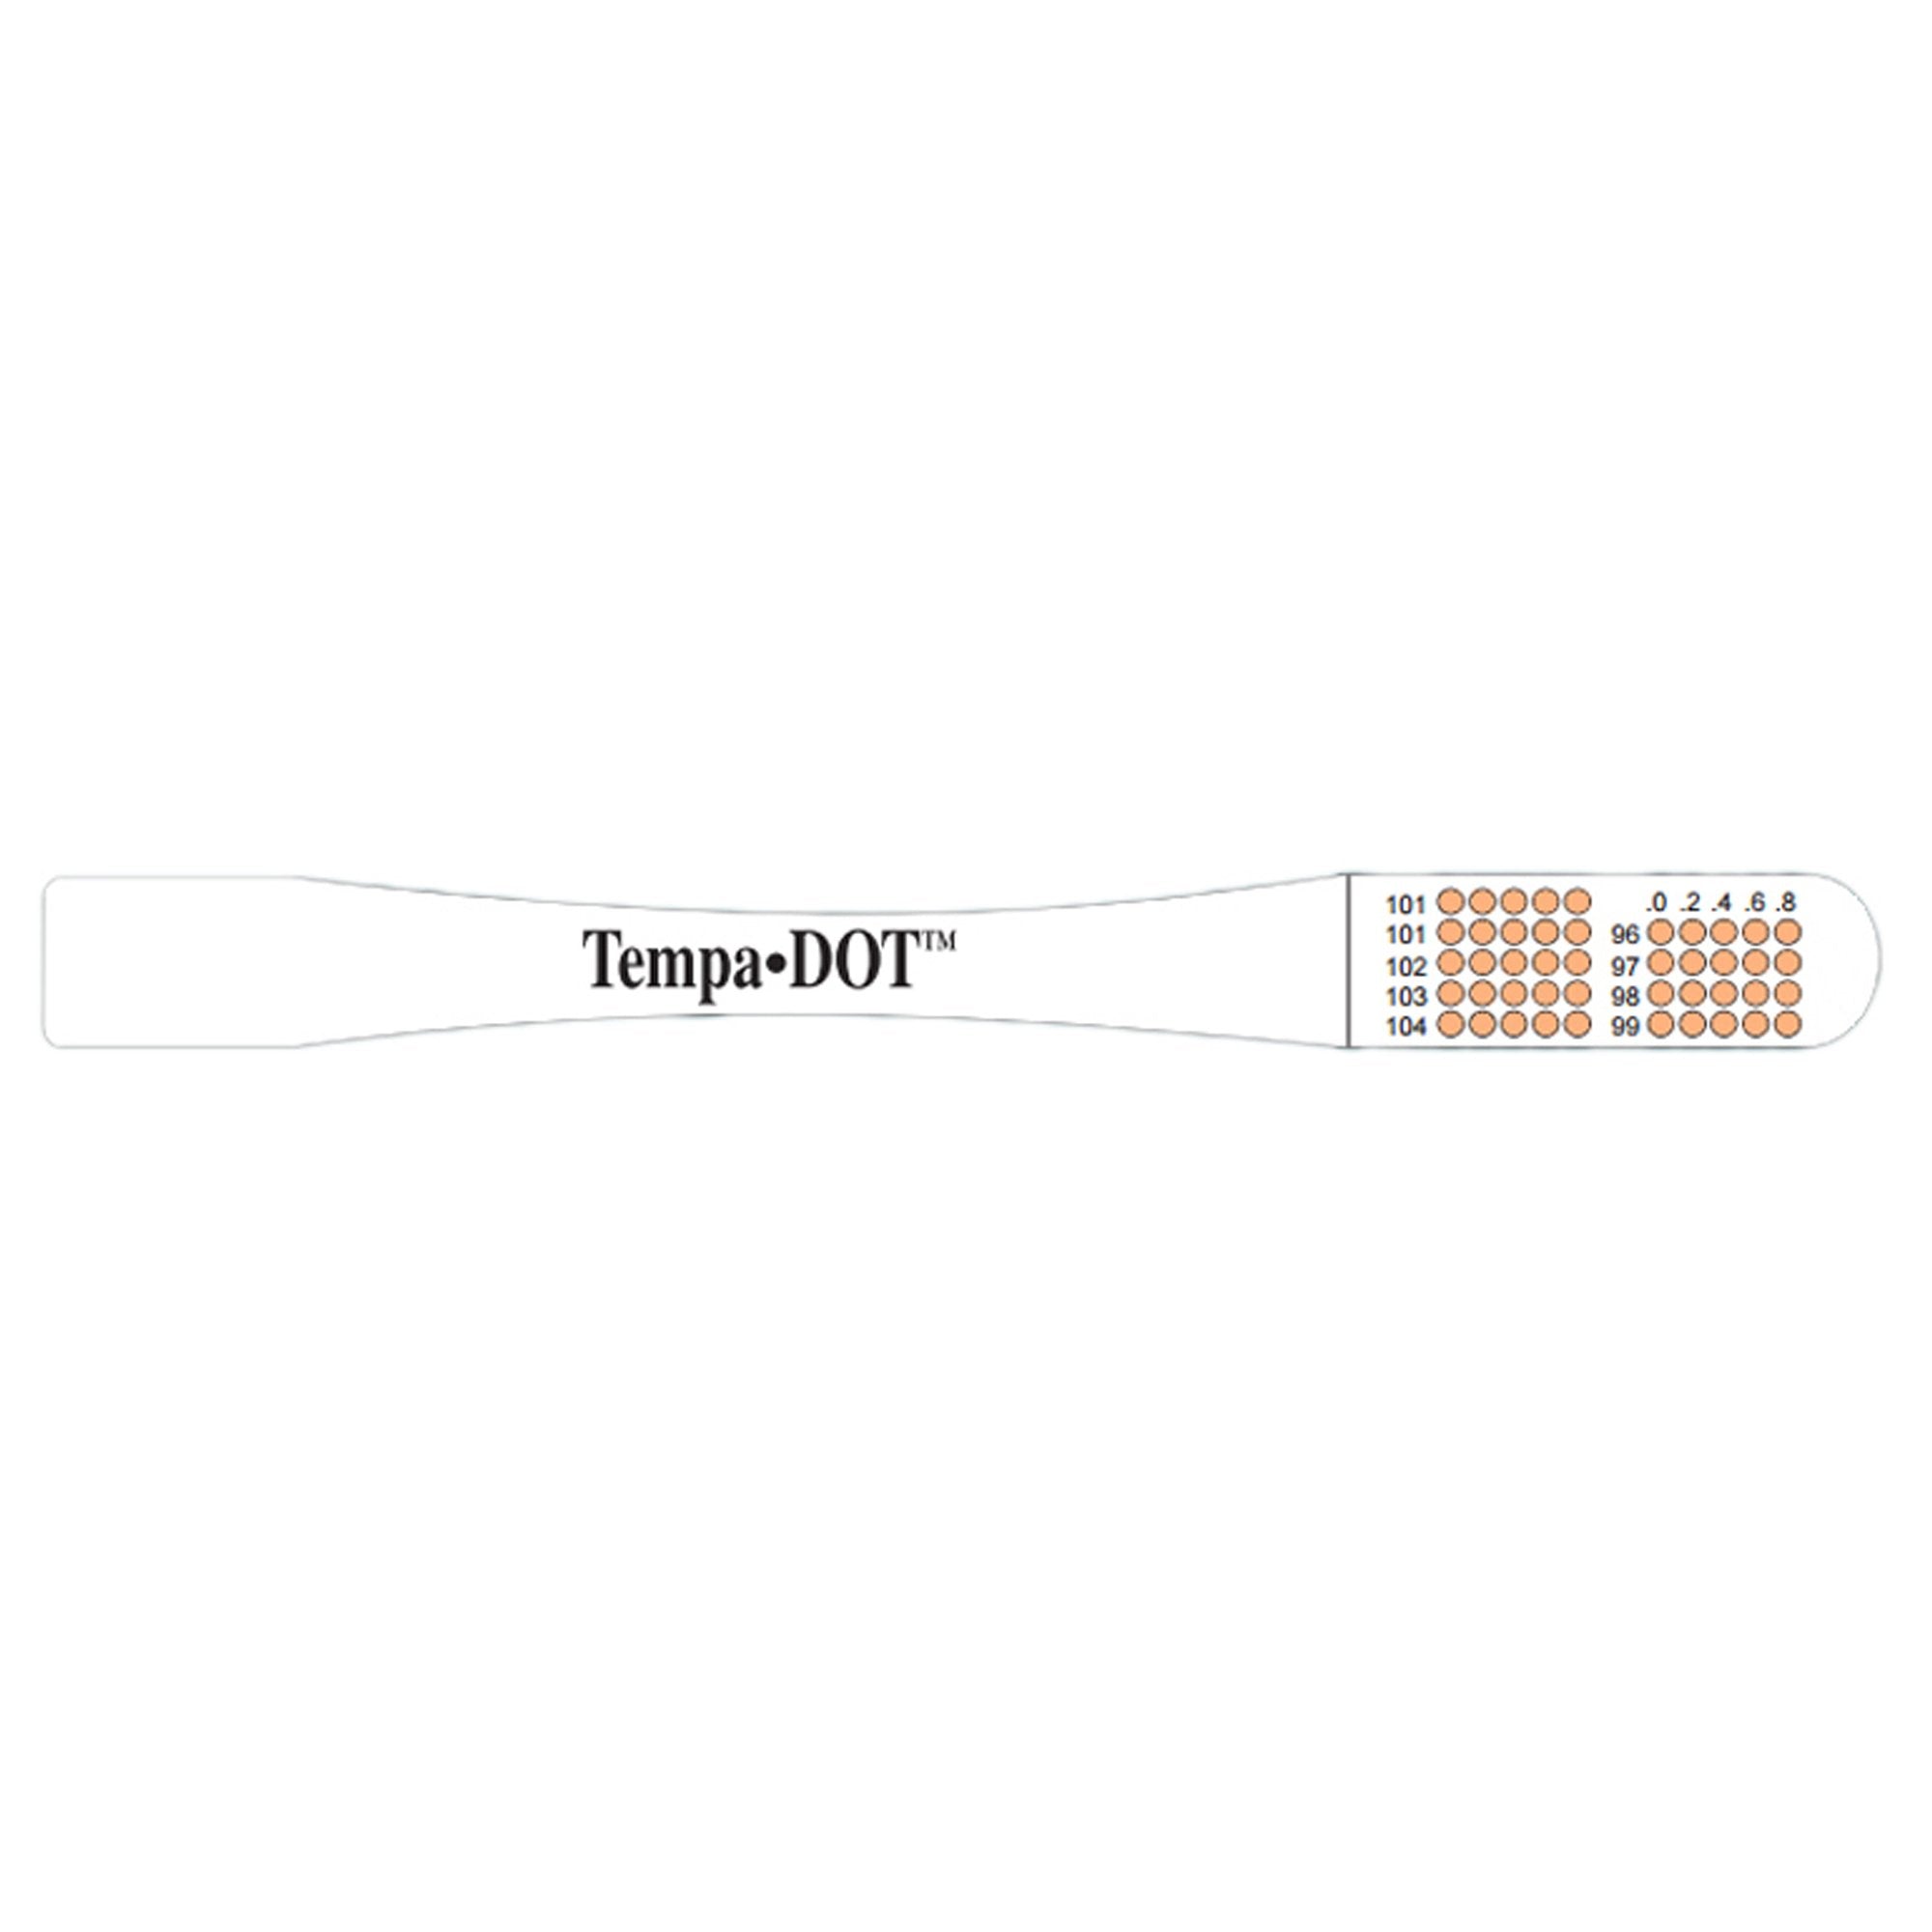 Disposable Oral Thermometer TempaDOT 99 to 104 F Color Dots Display